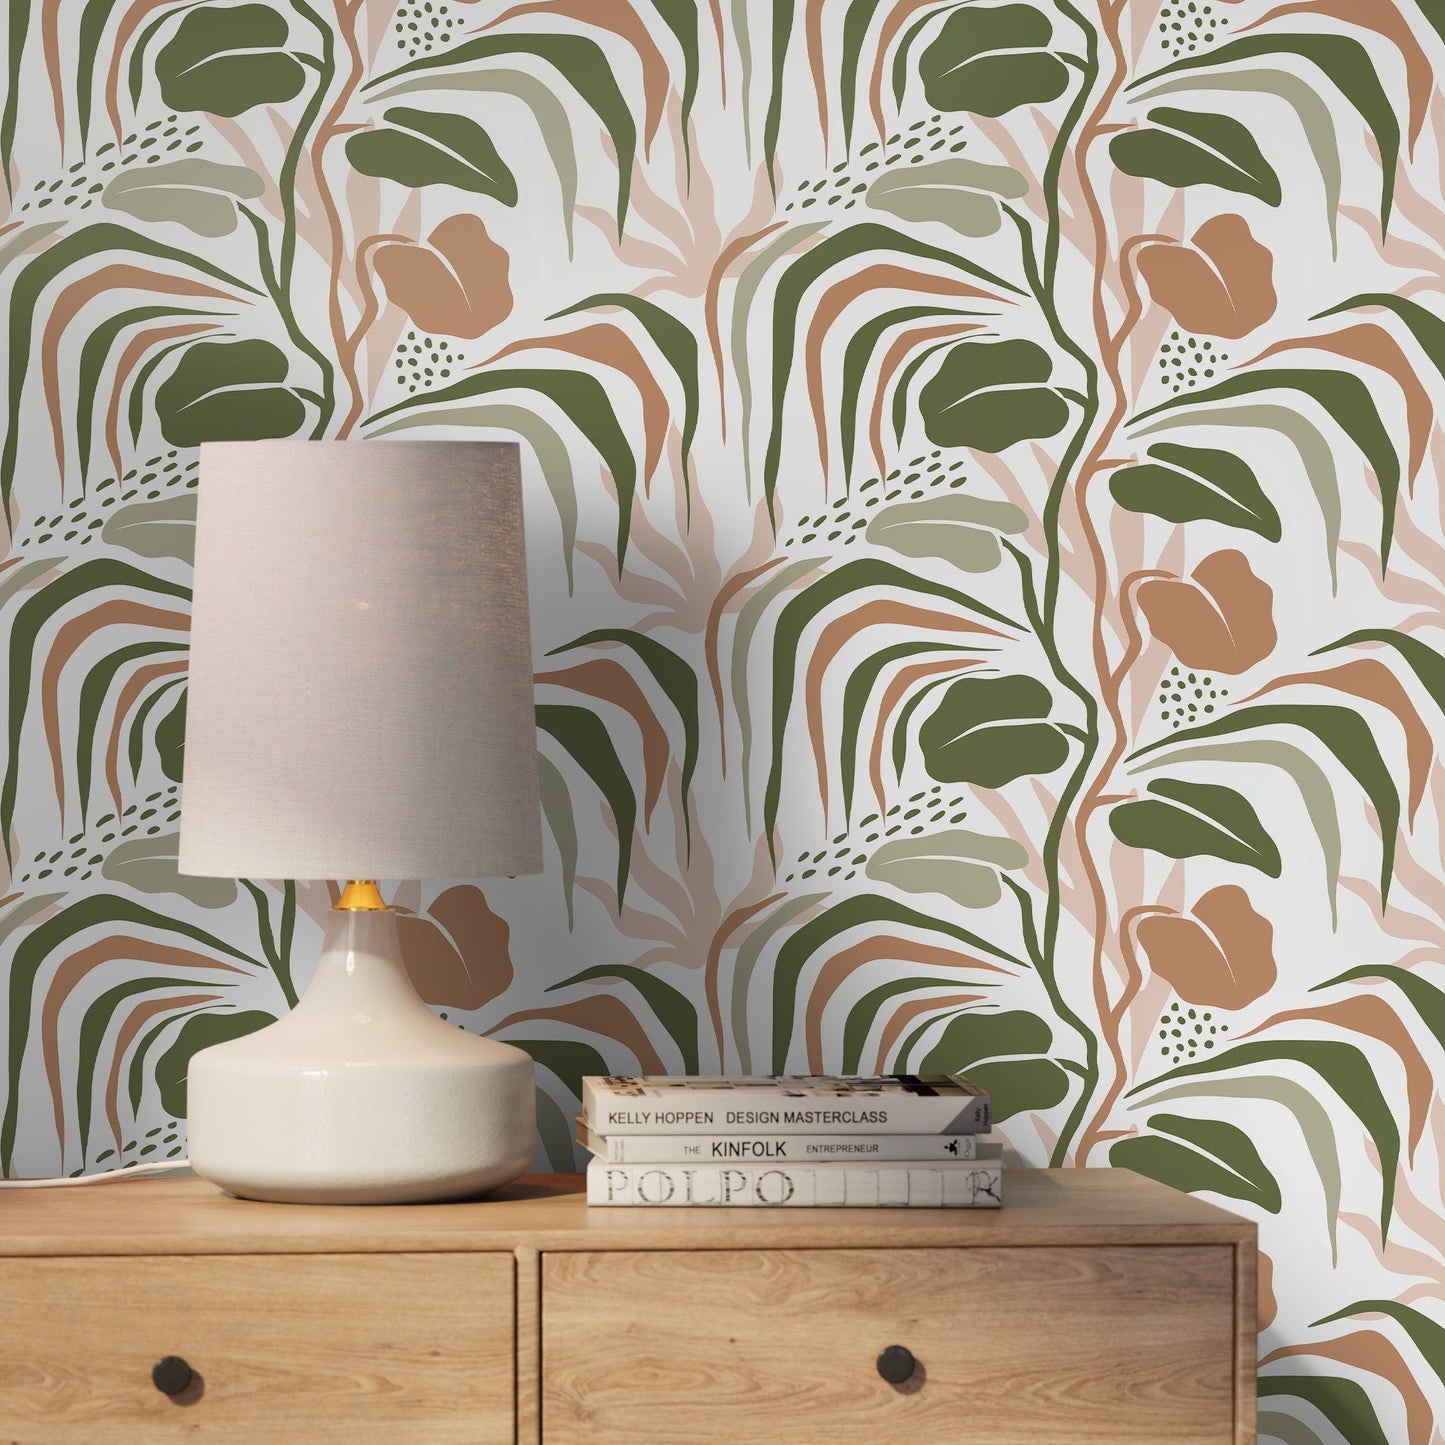 Tropical Leaves Wallpaper Boho Wallpaper Peel and Stick and Traditional Wallpaper - D719